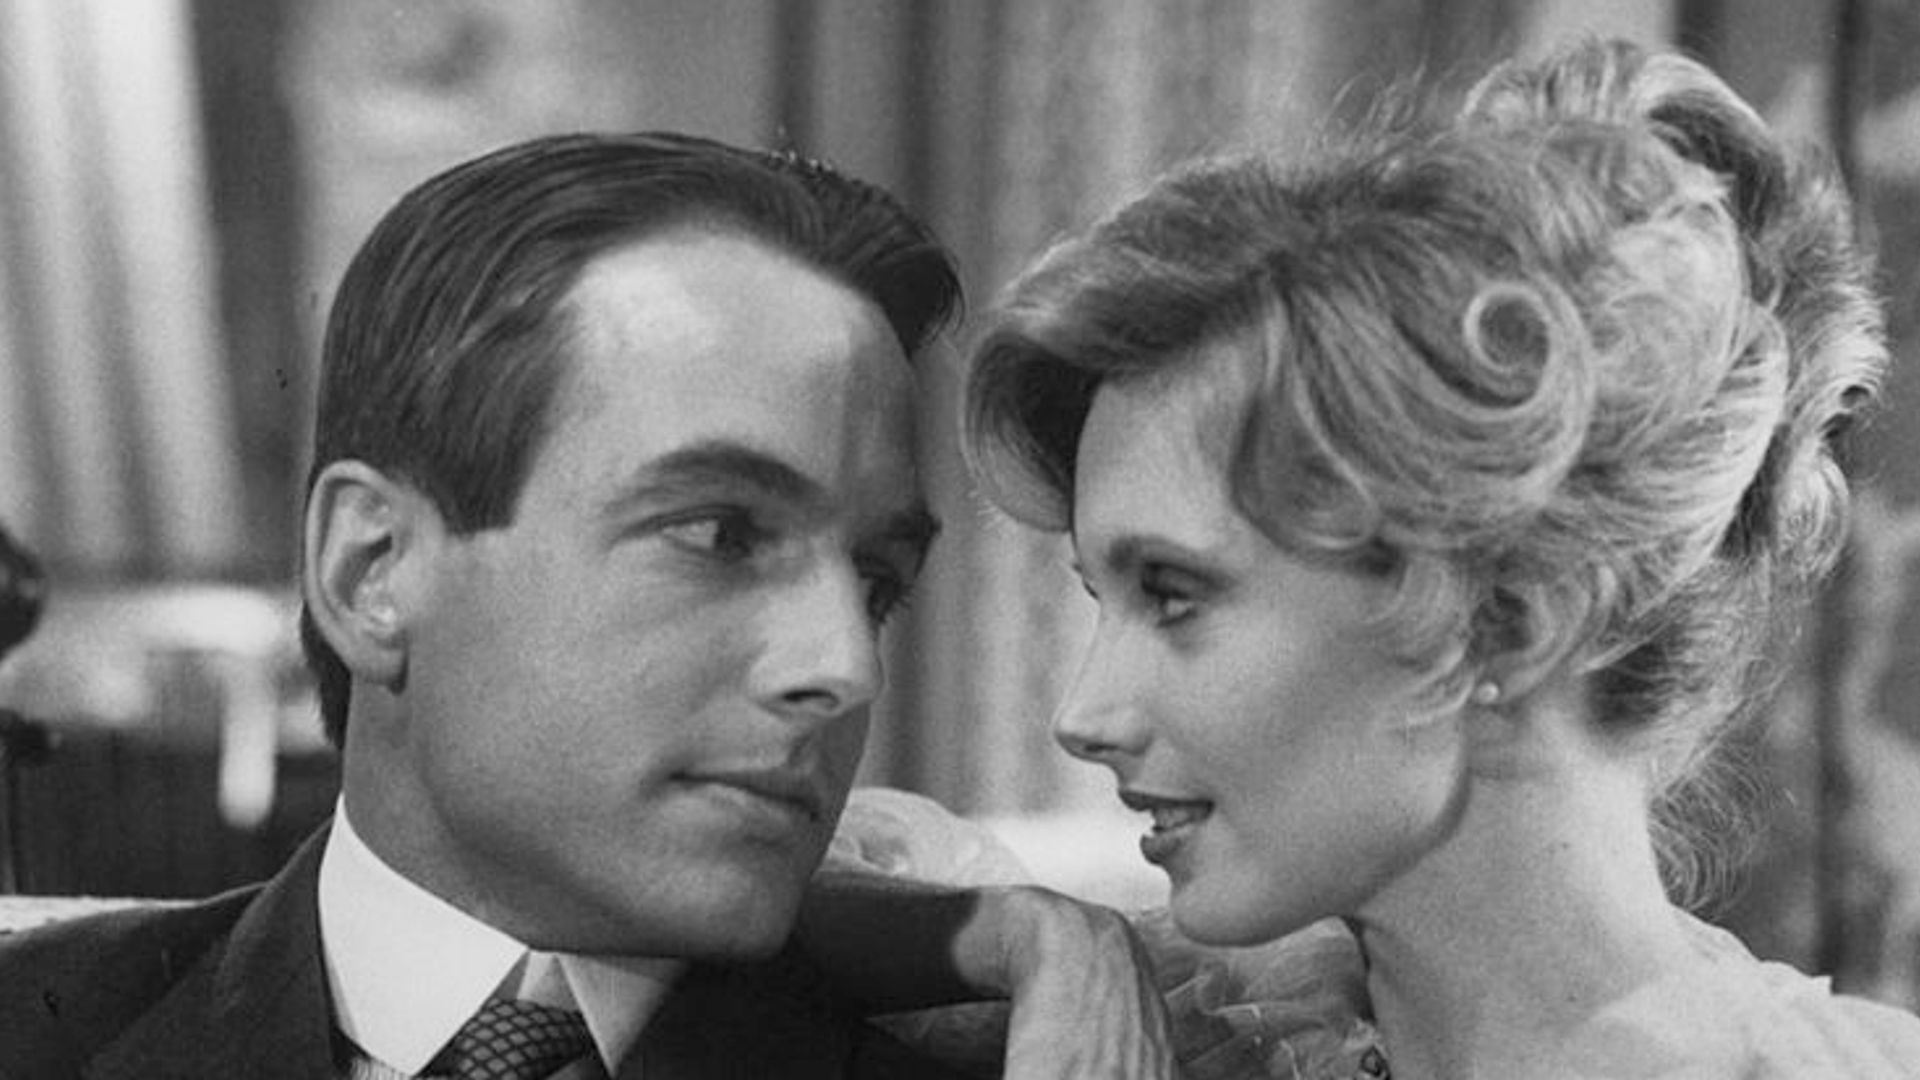 Mark Harmon looking into the eyes of Morgan Fairchild in a scene from the television movie 'The Dream Merchants', 1980